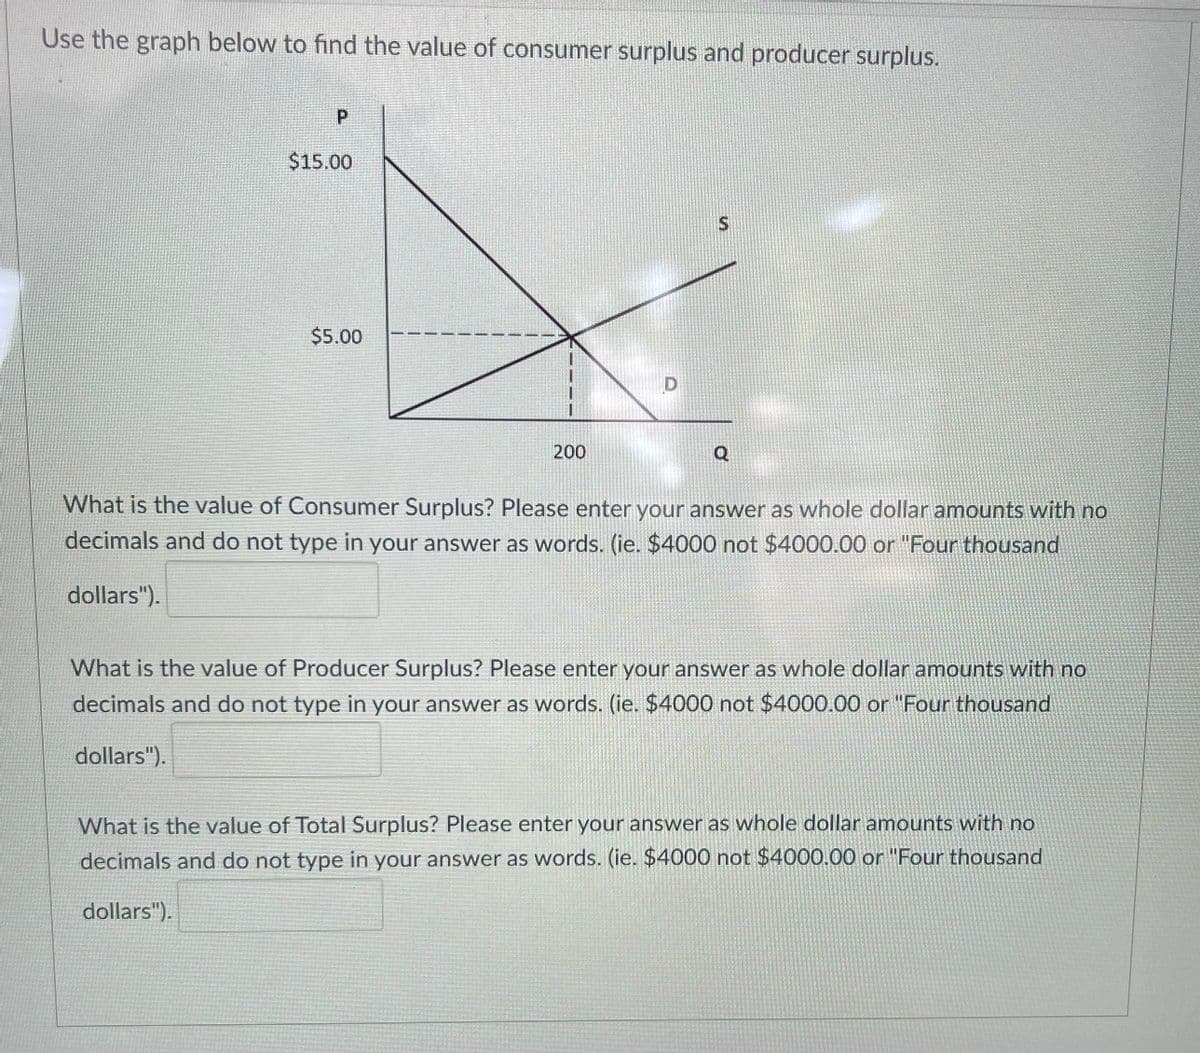 Use the graph below to find the value of consumer surplus and producer surplus.
P.
$15.00
$5.00
200
Q
What is the value of Consumer Surplus? Please enter your answer as whole dollar amounts with no
decimals and do not type in your answer as words. (ie. $4000 not $4000.00 or "Four thousand
dollars").
What is the value of Producer Surplus? Please enter your answer as whole dollar amounts with no
decimals and do not type in your answer as words. (ie. $4000 not $4000.00 or "Four thousand
dollars").
What is the value of Total Surplus? Please enter your answer as whole dollar amounts with no
decimals and do not type in your answer as words. (ie. $4000 not $4000.00 or "Four thousand
dollars").
